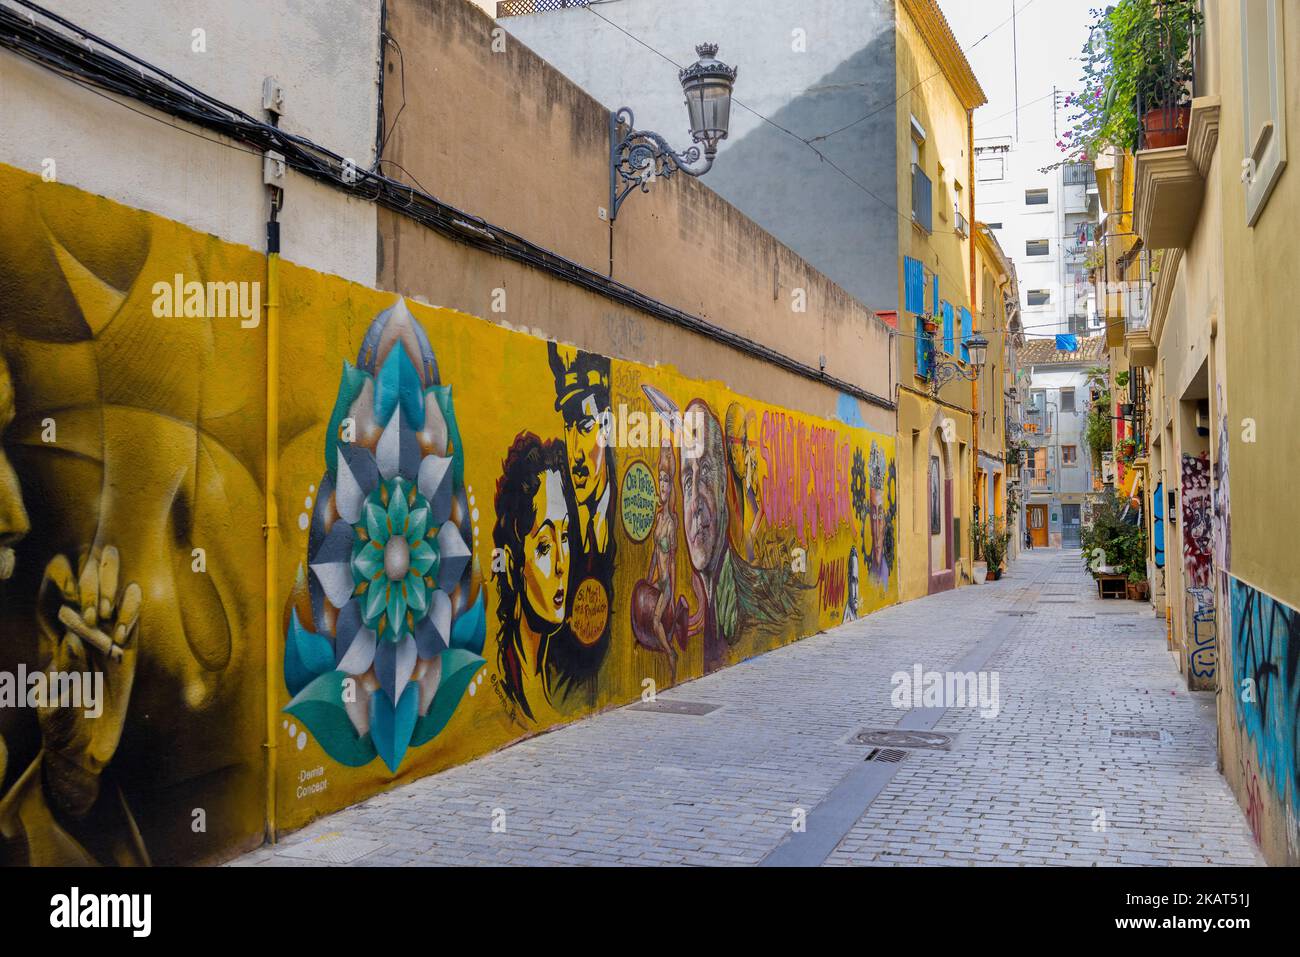 'If you love a revolution of cool aunts' Wall art, Calle de Cañete, Valencia, Spain Stock Photo